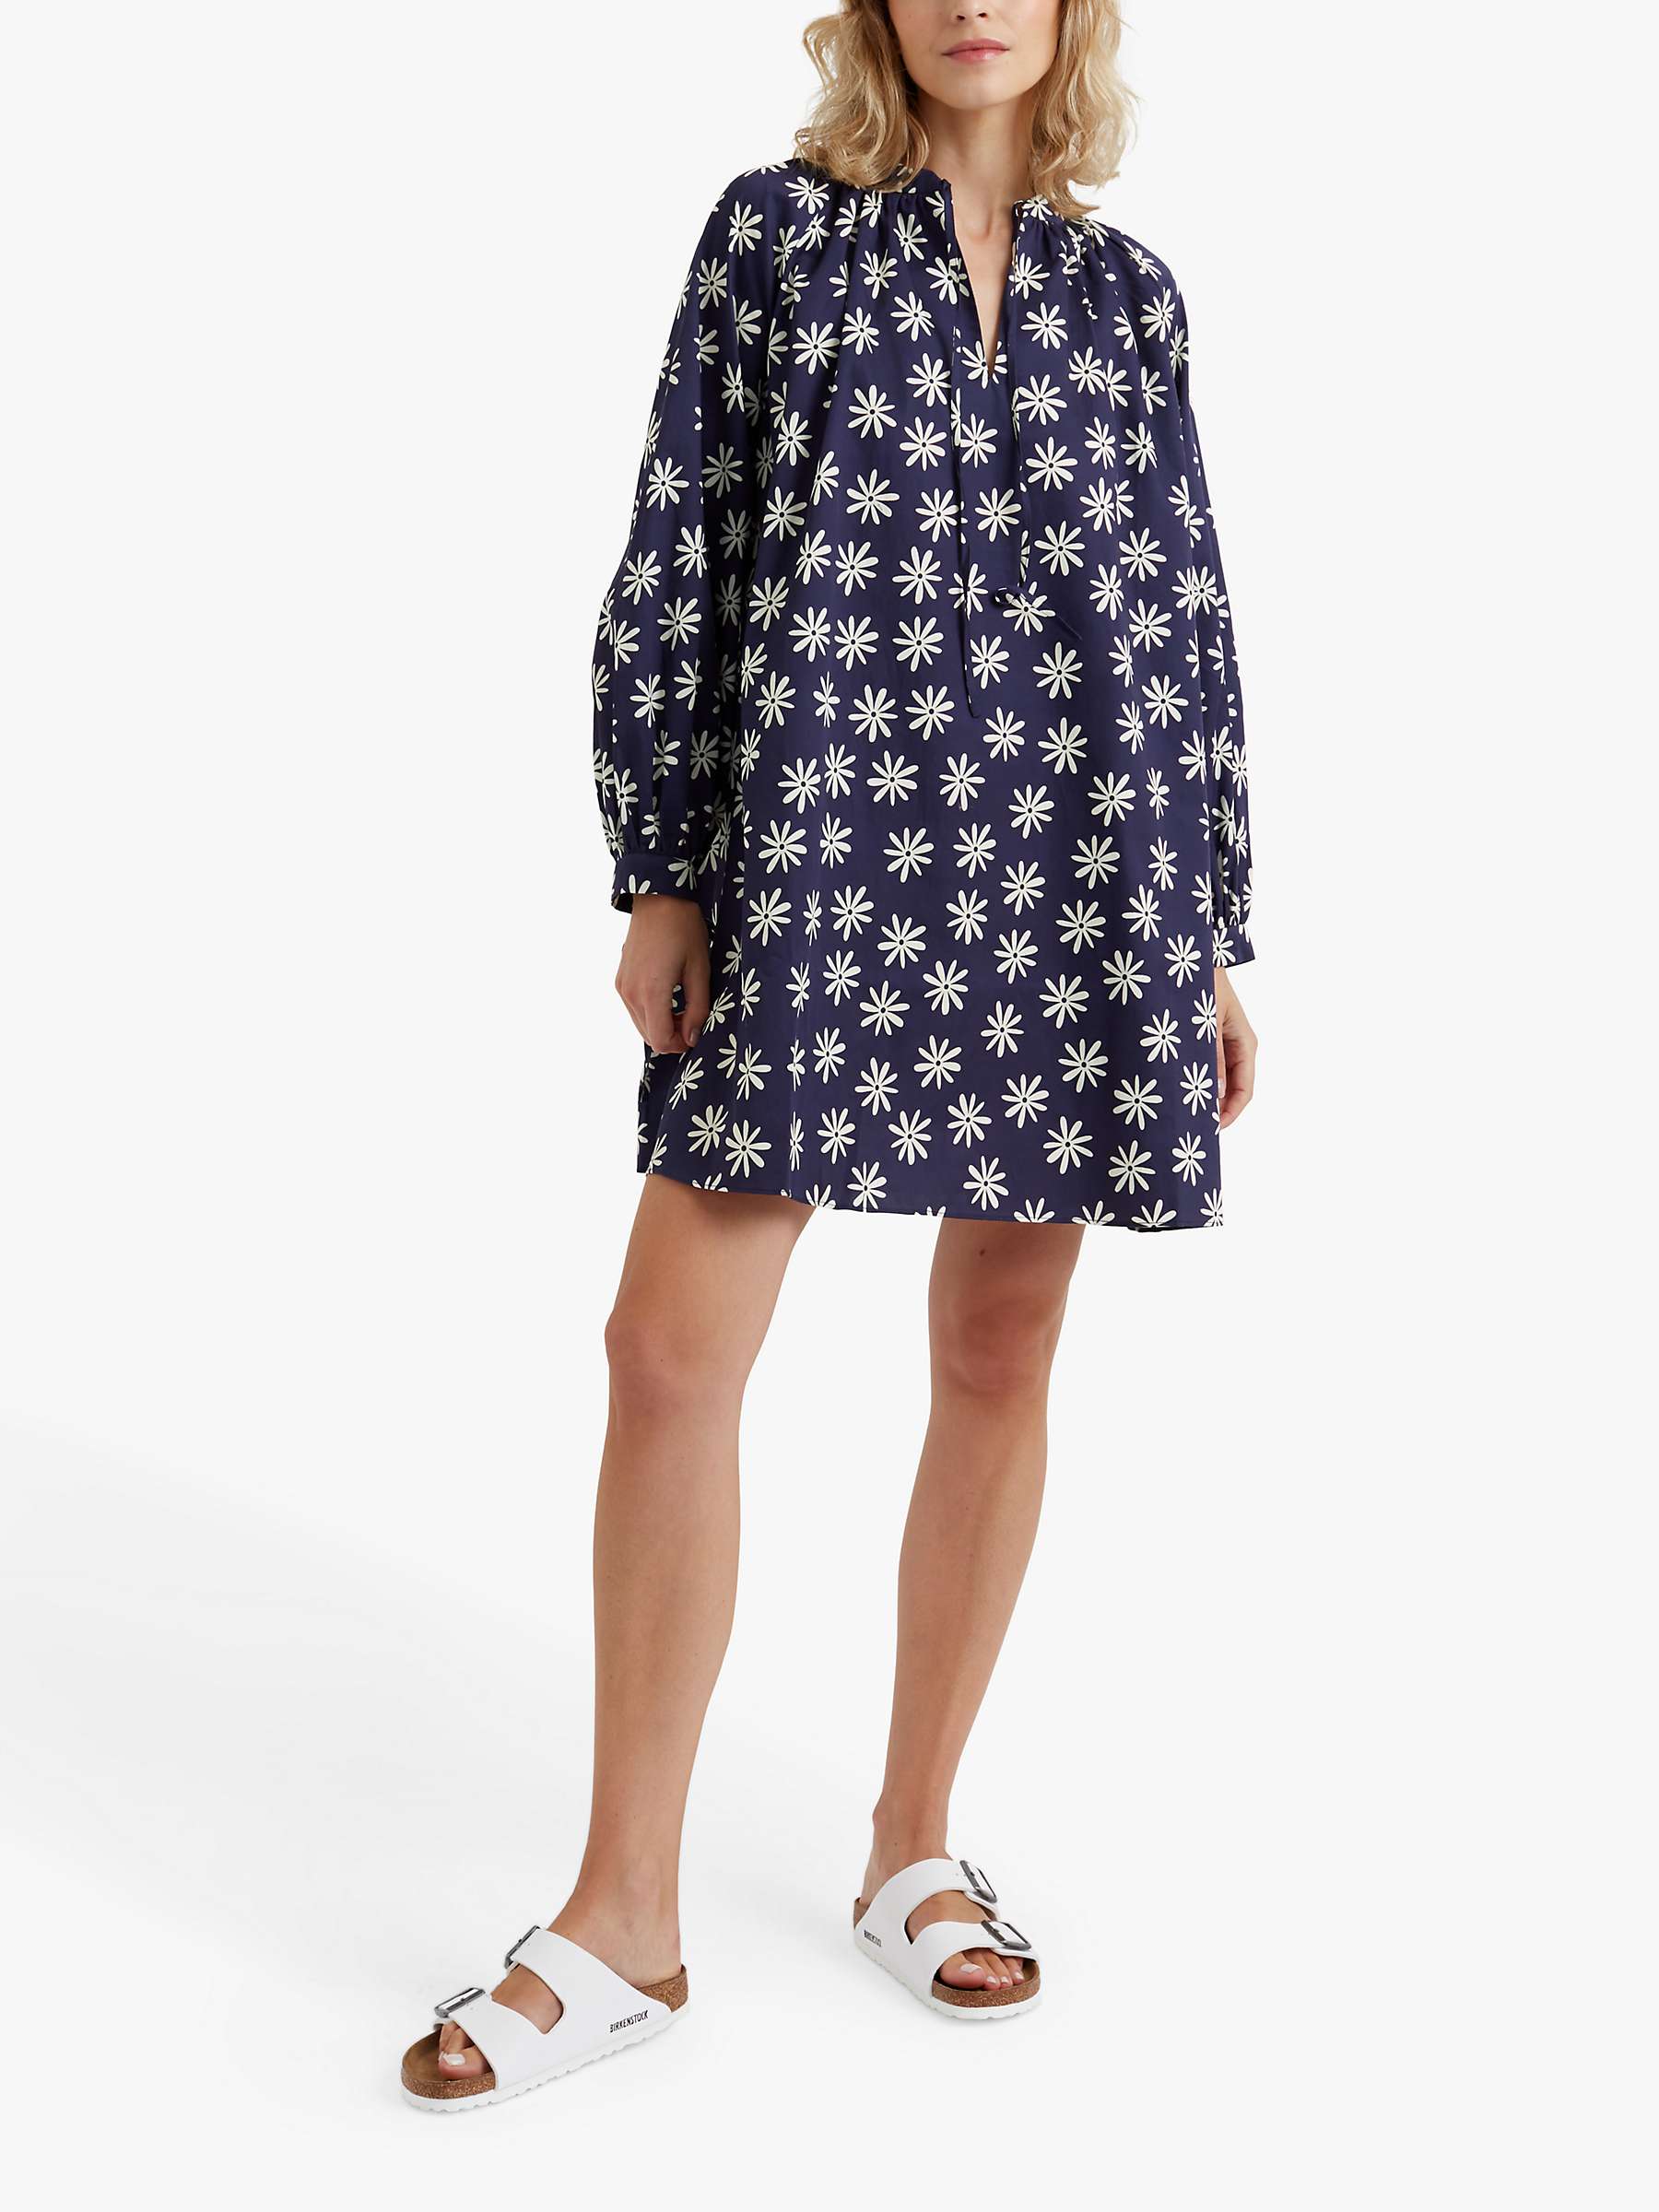 Buy Chinti & Parker Ditsy Floral Shift Dress, Navy/Cream Online at johnlewis.com